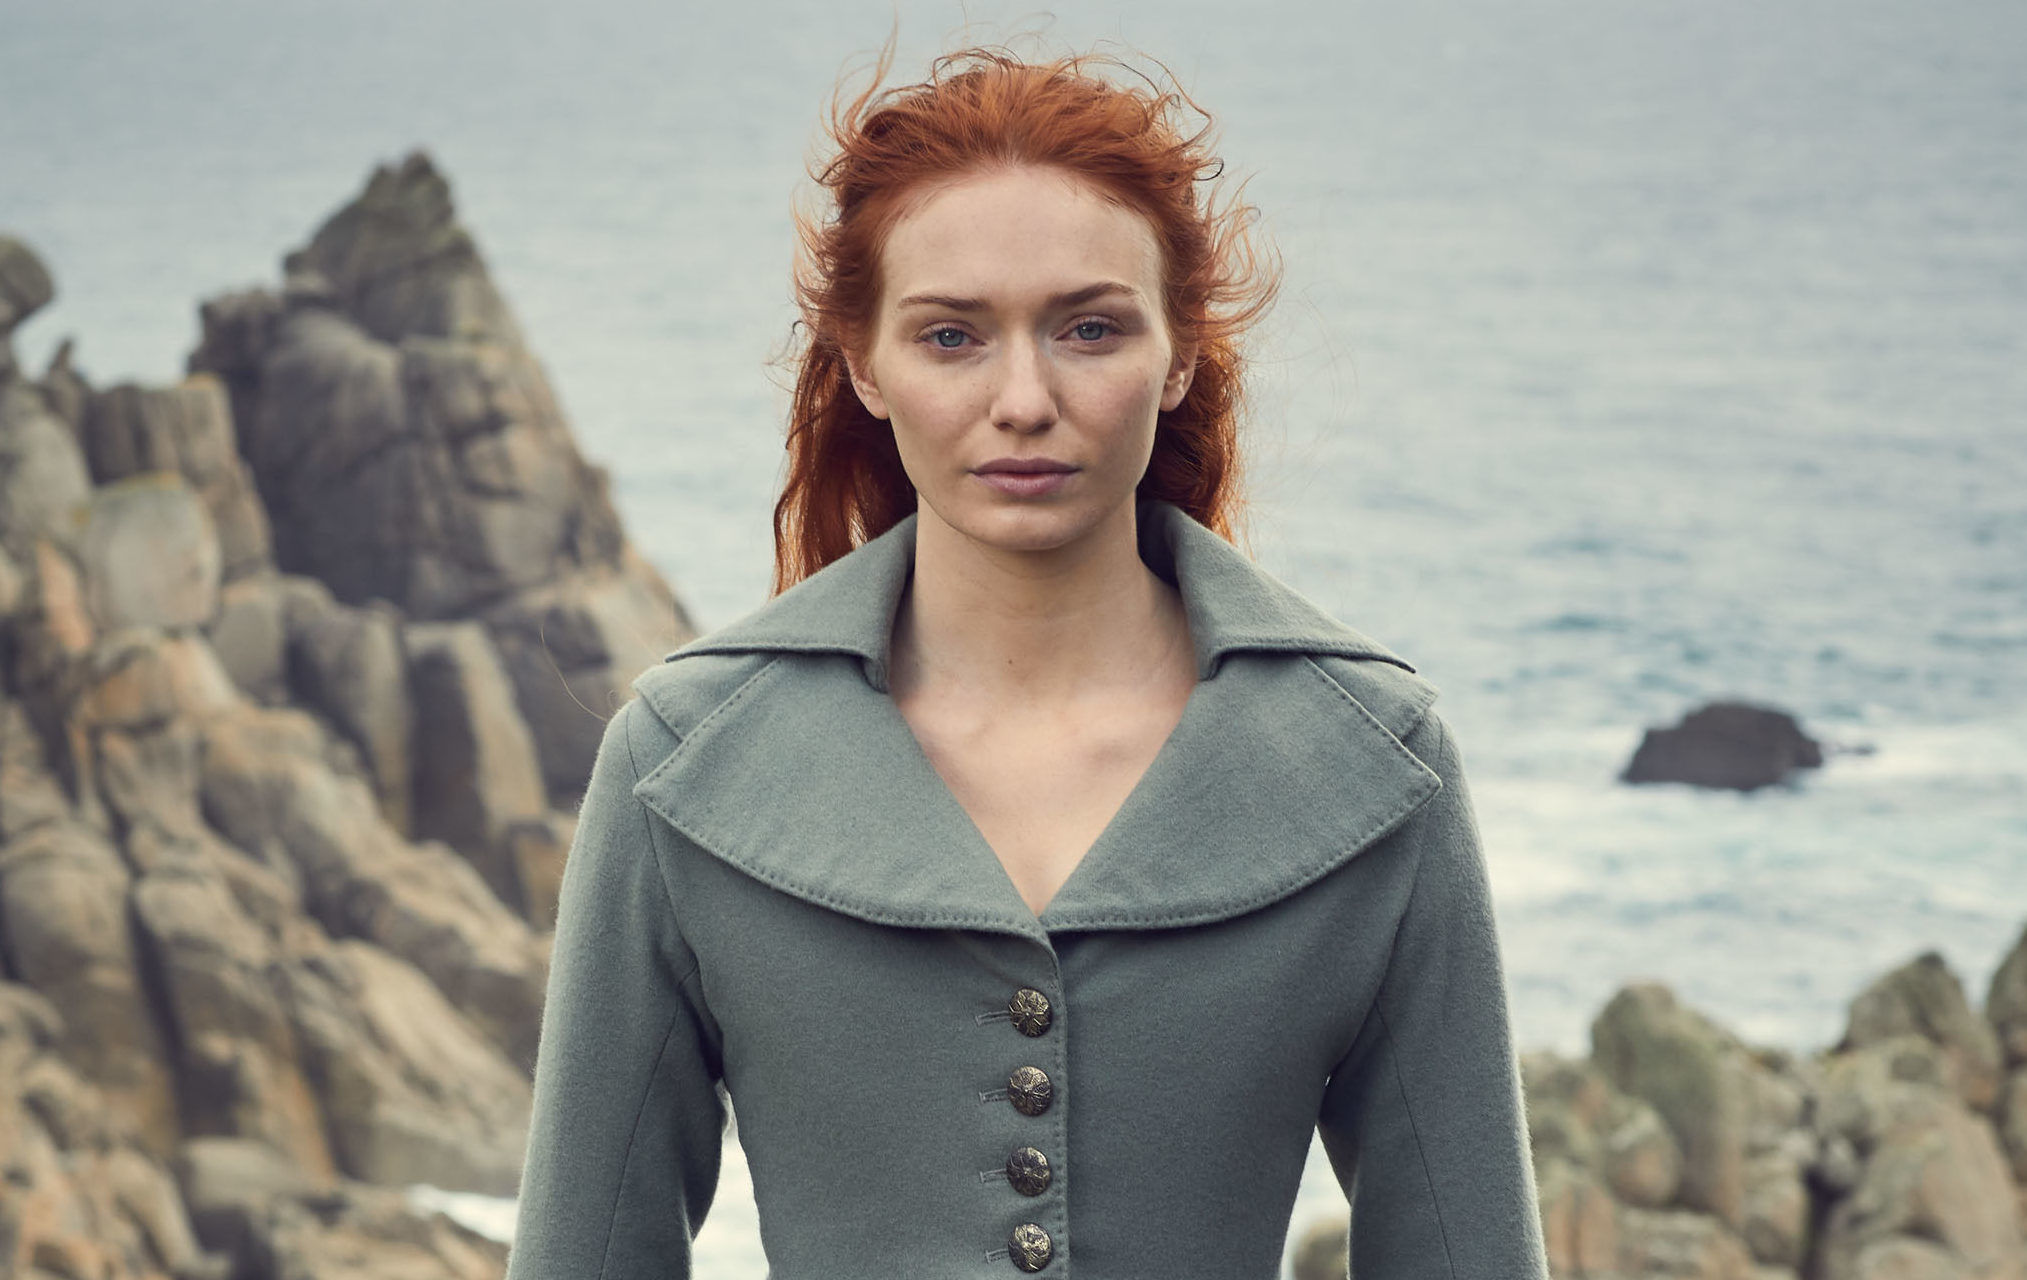 Poldark Star Eleanor Tomlinson Is Thrilled To Be Playing A Strong 